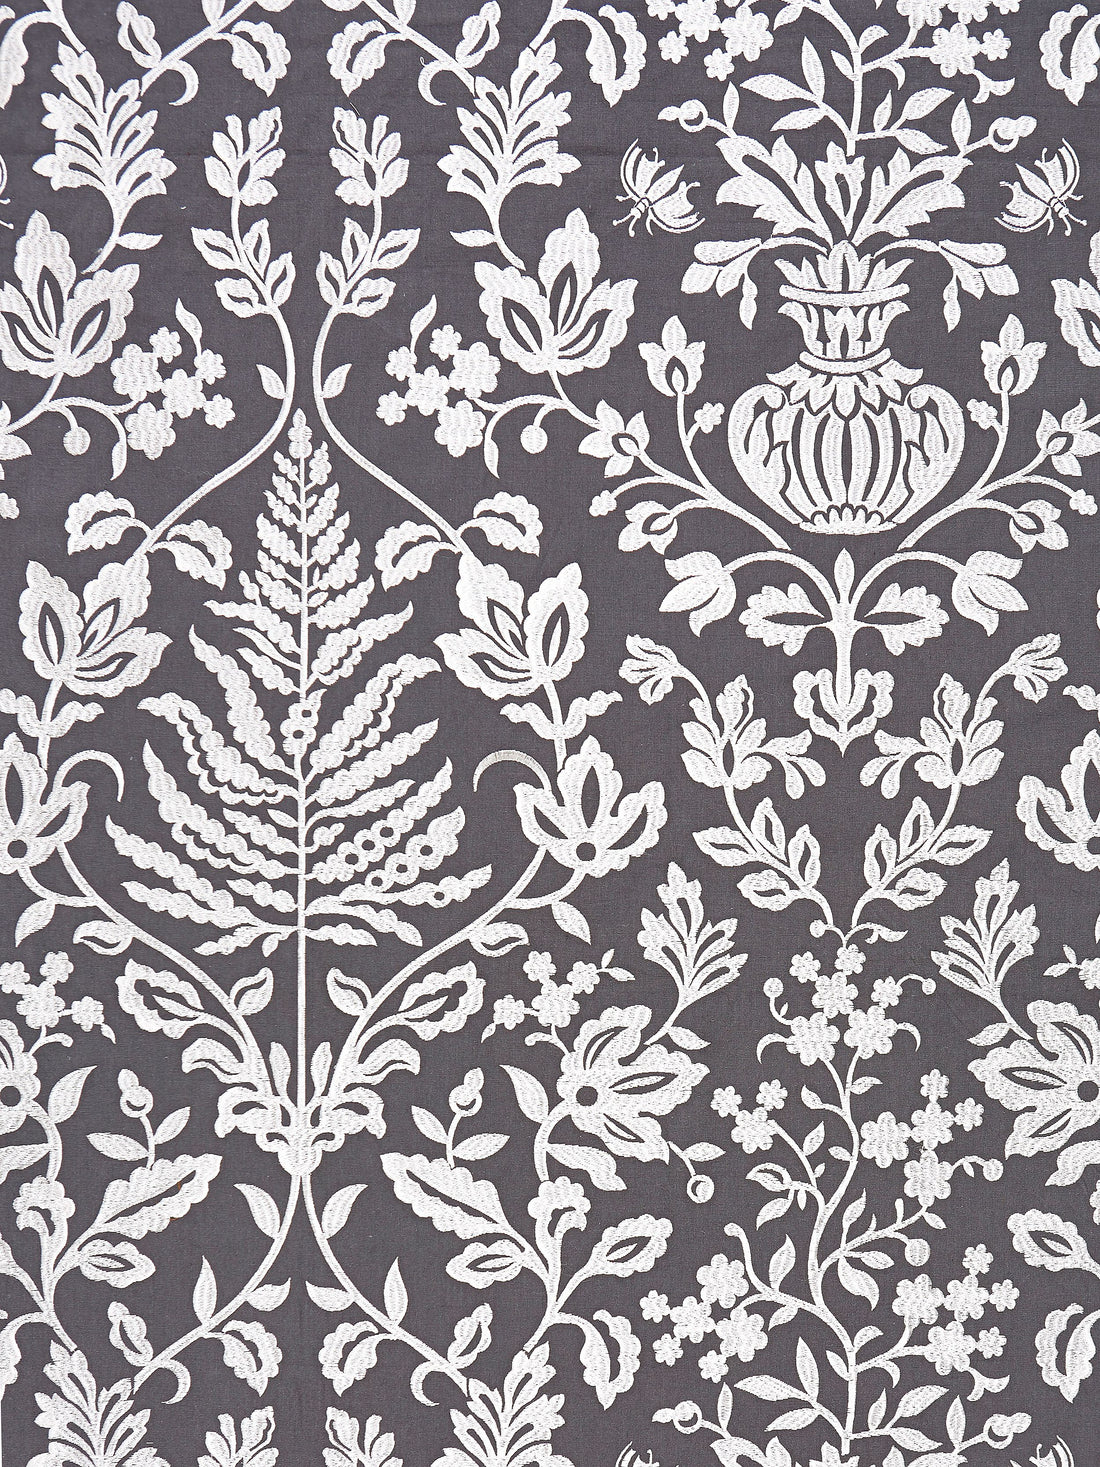 Shalimar Embroidery fabric in charcoal color - pattern number SC 000327032 - by Scalamandre in the Scalamandre Fabrics Book 1 collection